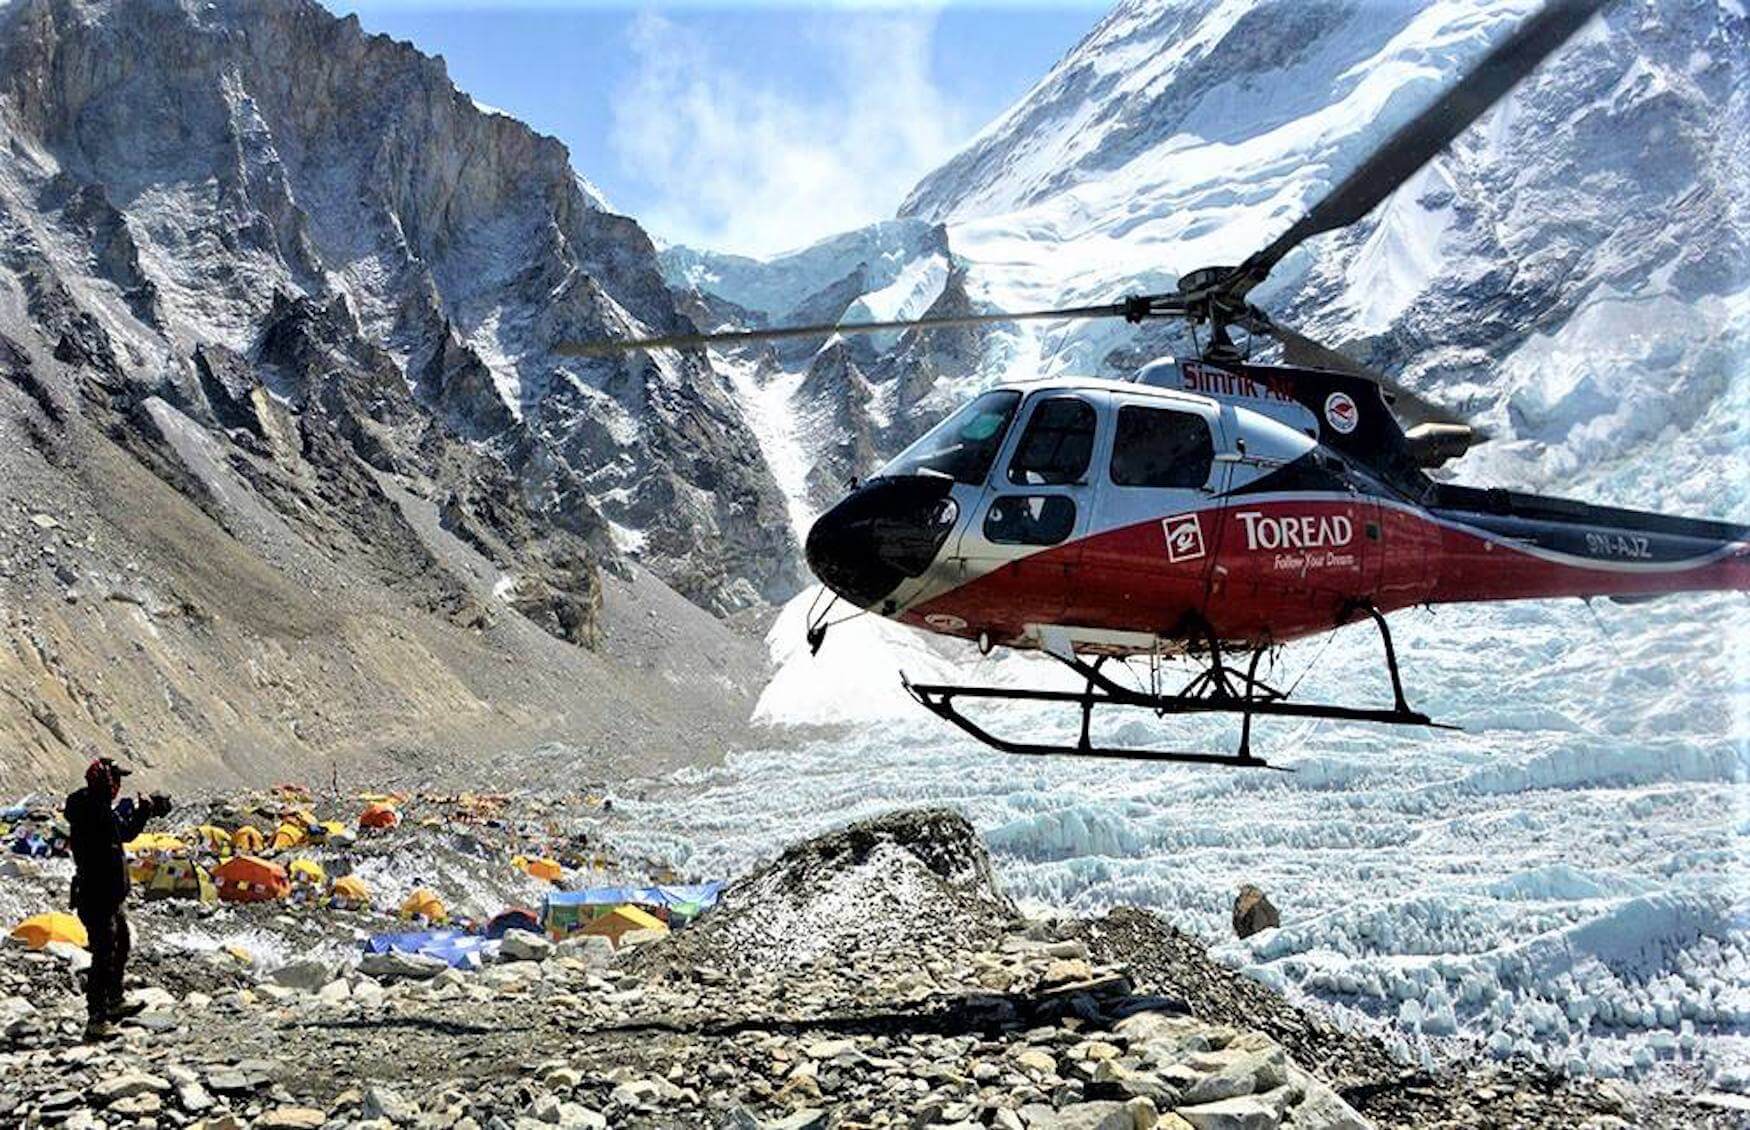 everest-base-camp-heli-tour-with-landing